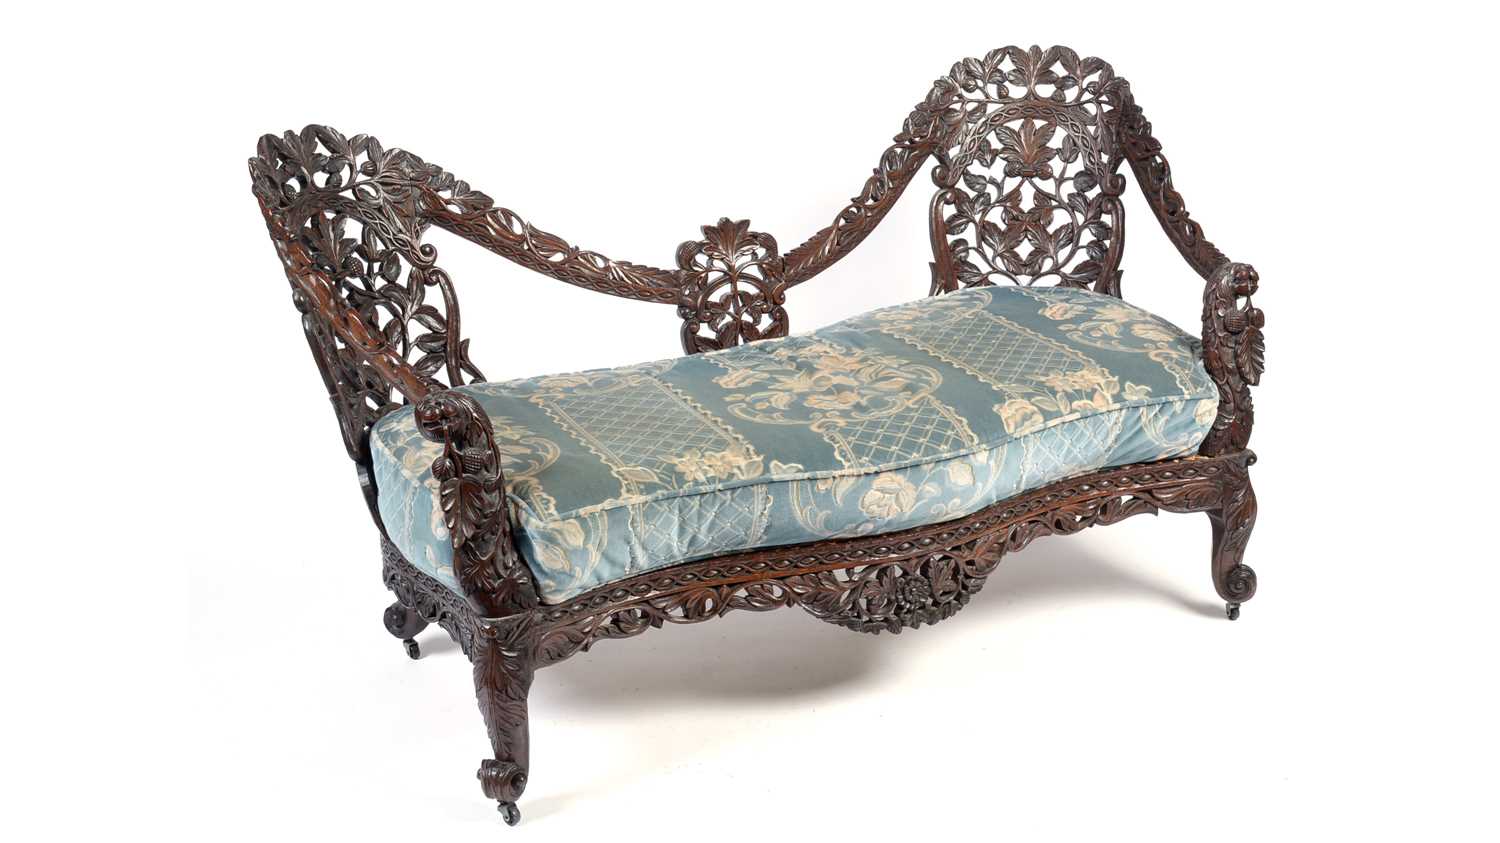 A decorative late 19th Century Anglo-Indian carved hardwood two seater sofa